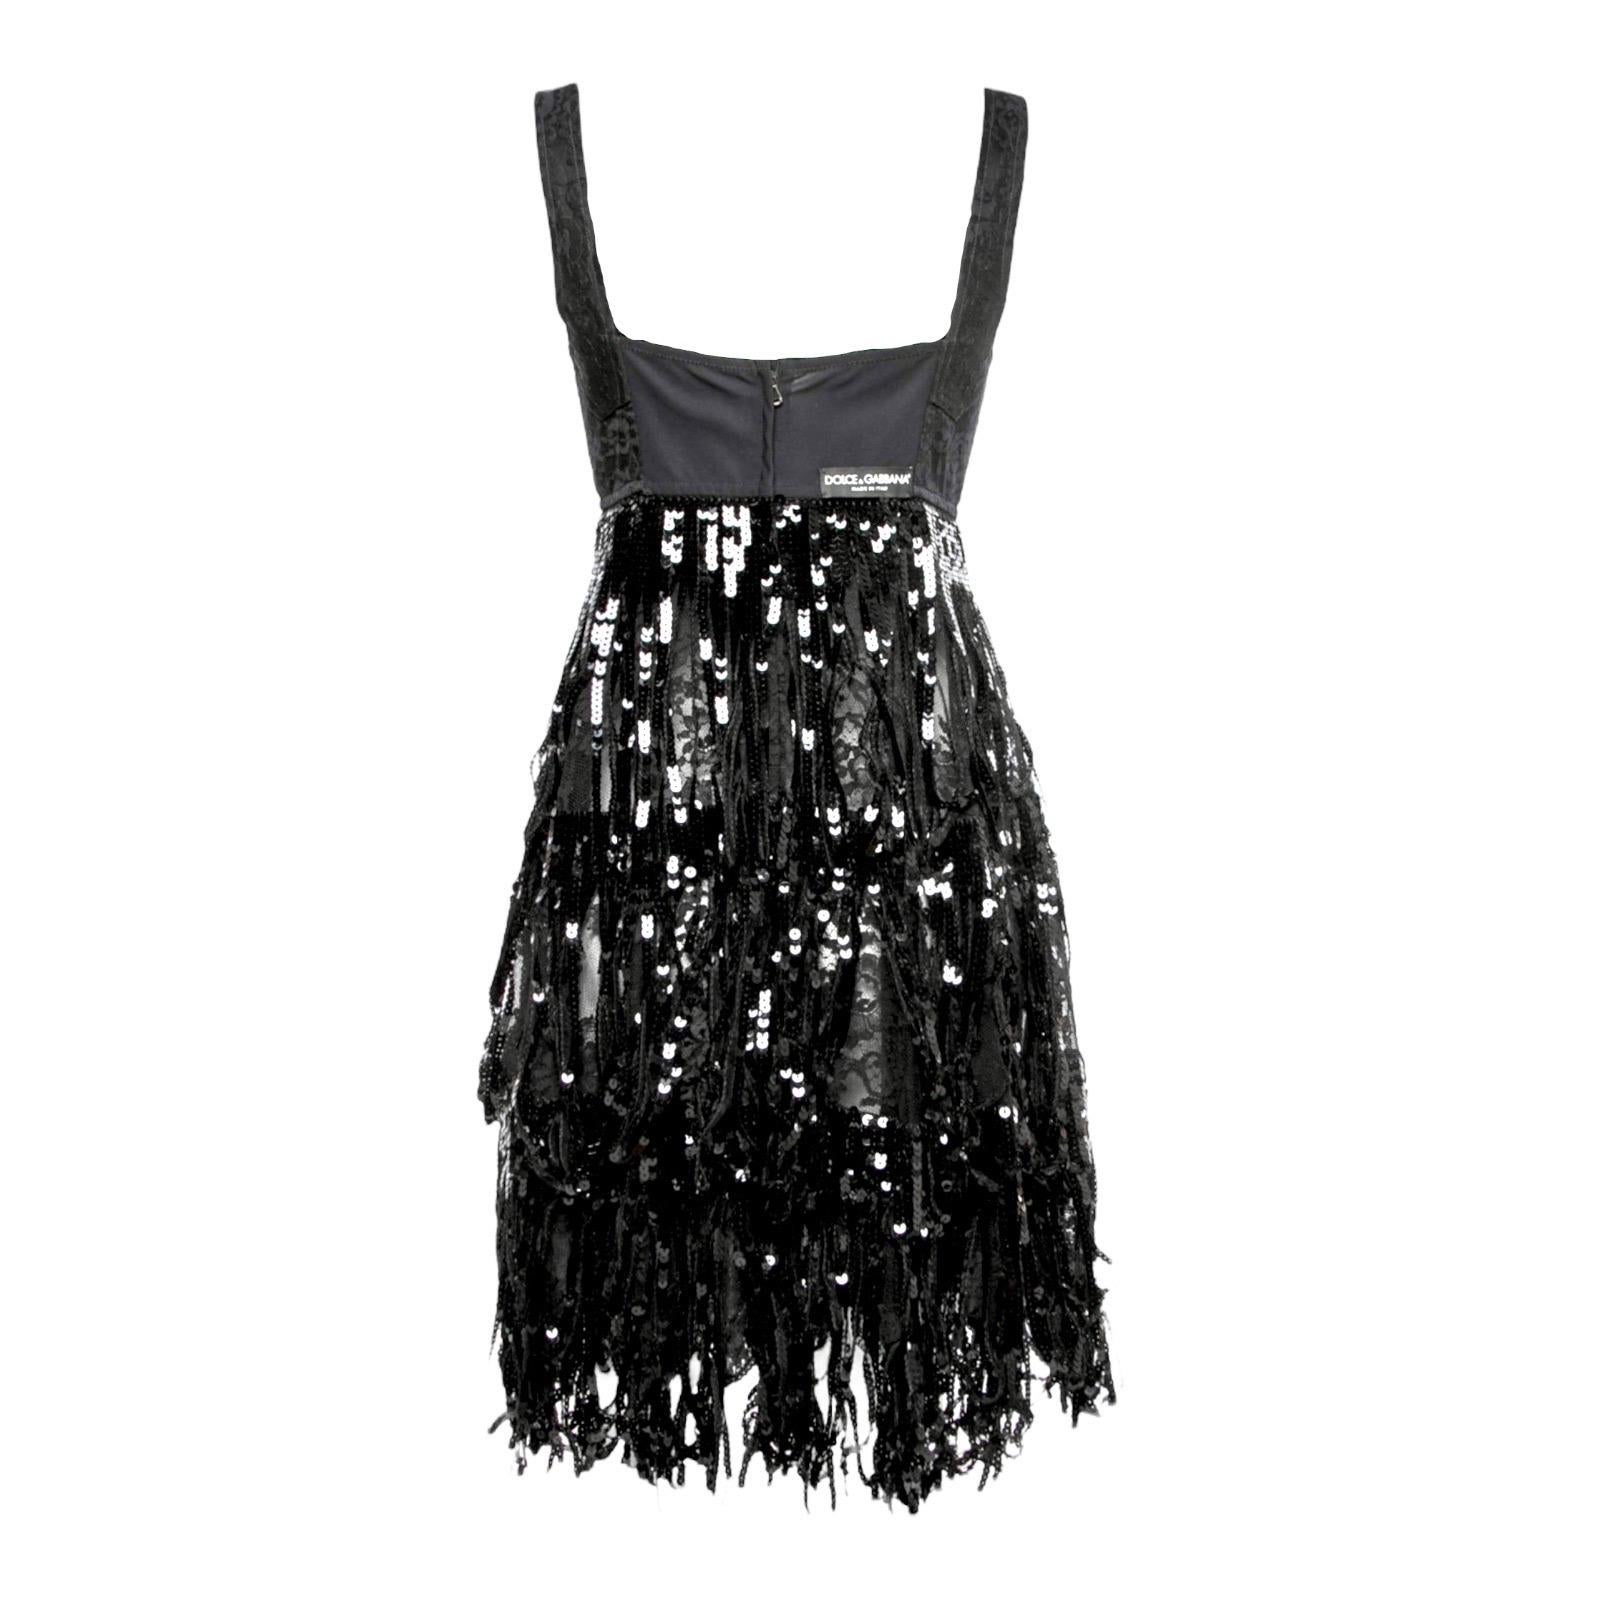 A DOLCE & GABBANA classic signature piece that will last you for years
Stunning dress with corset style top 
Lower part made of several layers of lace
Black sequin fringes layered over the skirt part
Dolce & Gabbana label on back
An amazing & unique